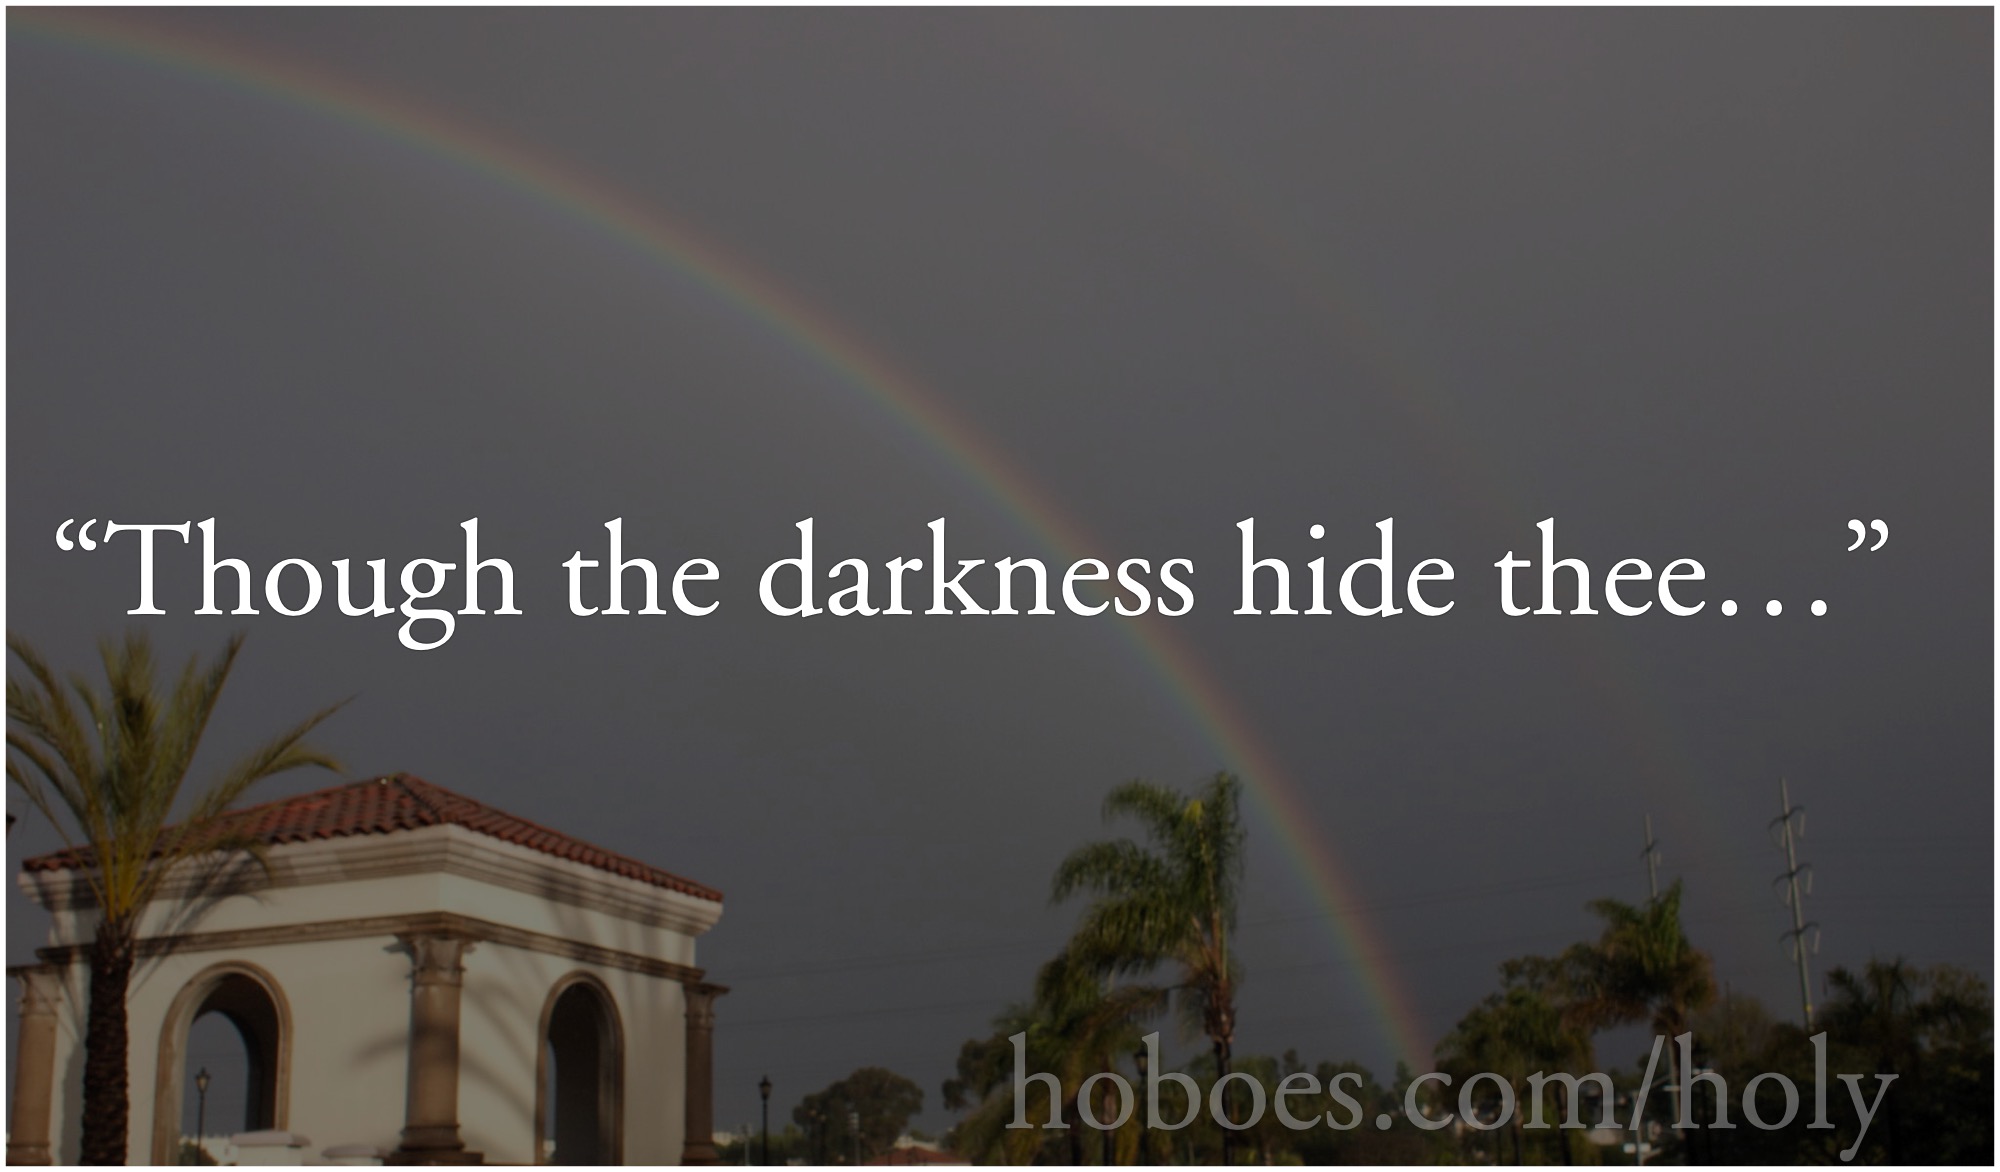 Rainbow in darkness: “Though the darkness hide thee…” over a San Diego double rainbow.; University of San Diego; Hymns; rainbows